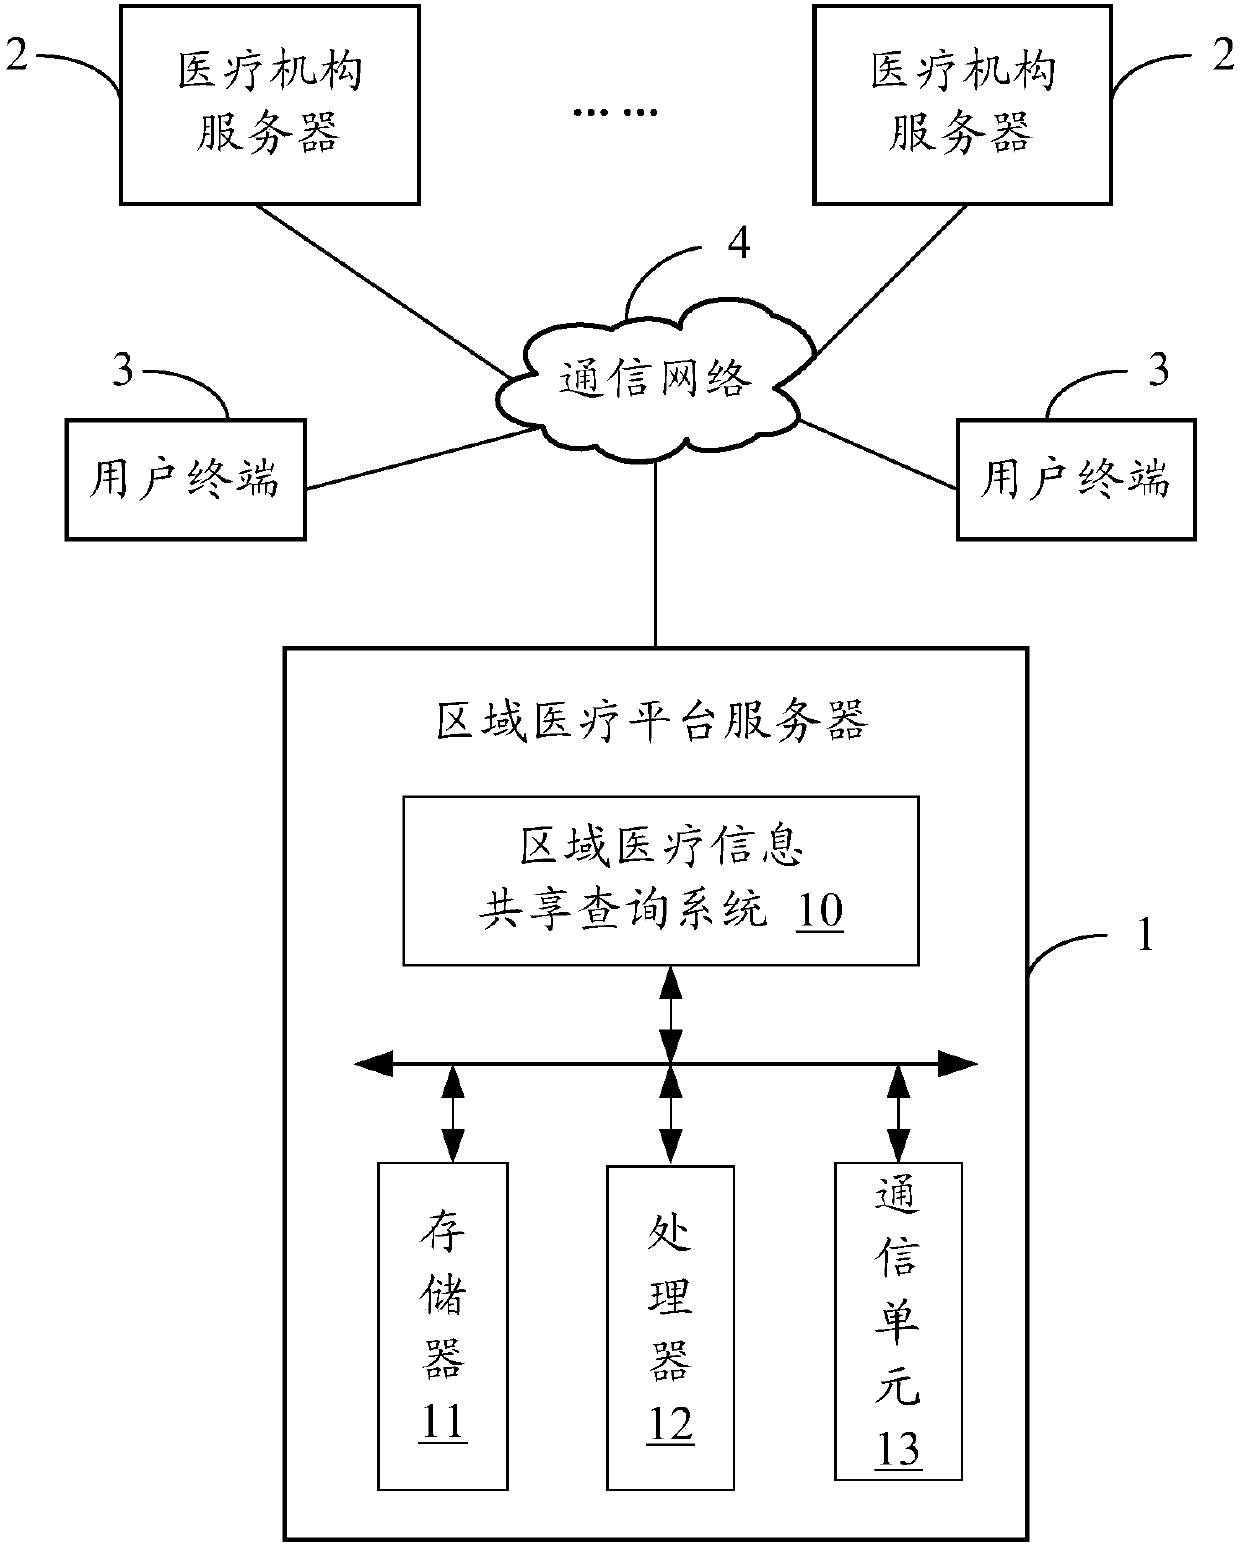 Regional medical information sharing query system and method